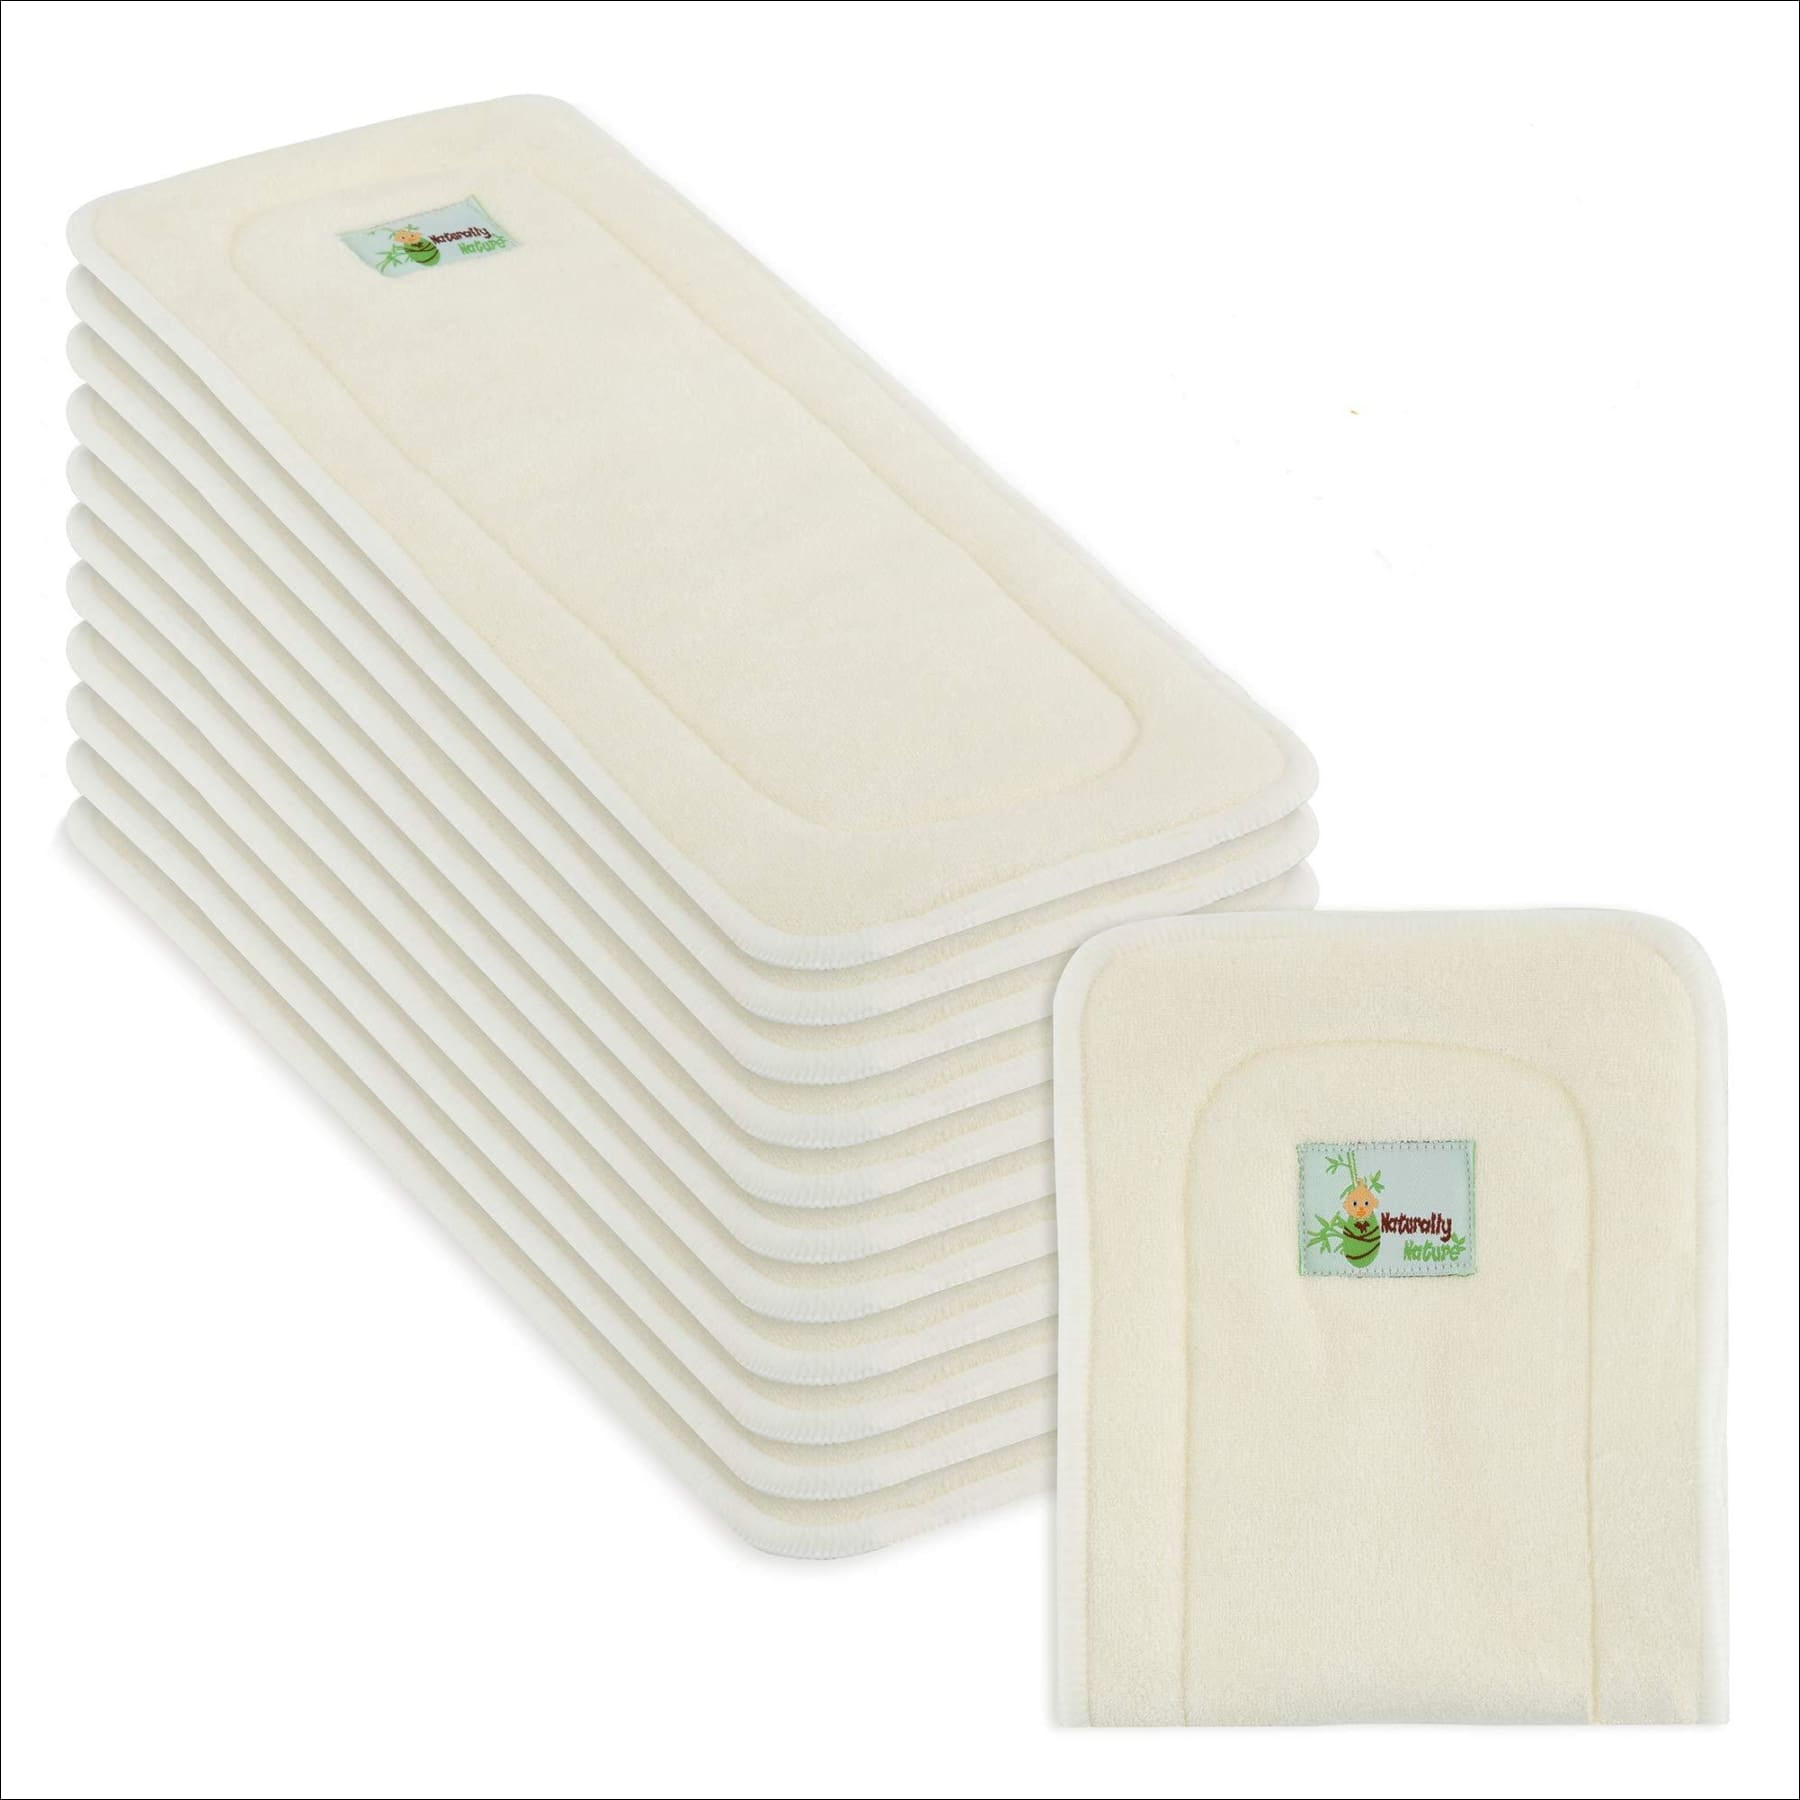 Pro 5 Layers Reusable Baby Bamboo Diapers Inserts Boosters Nappy Liners Mat Pads 